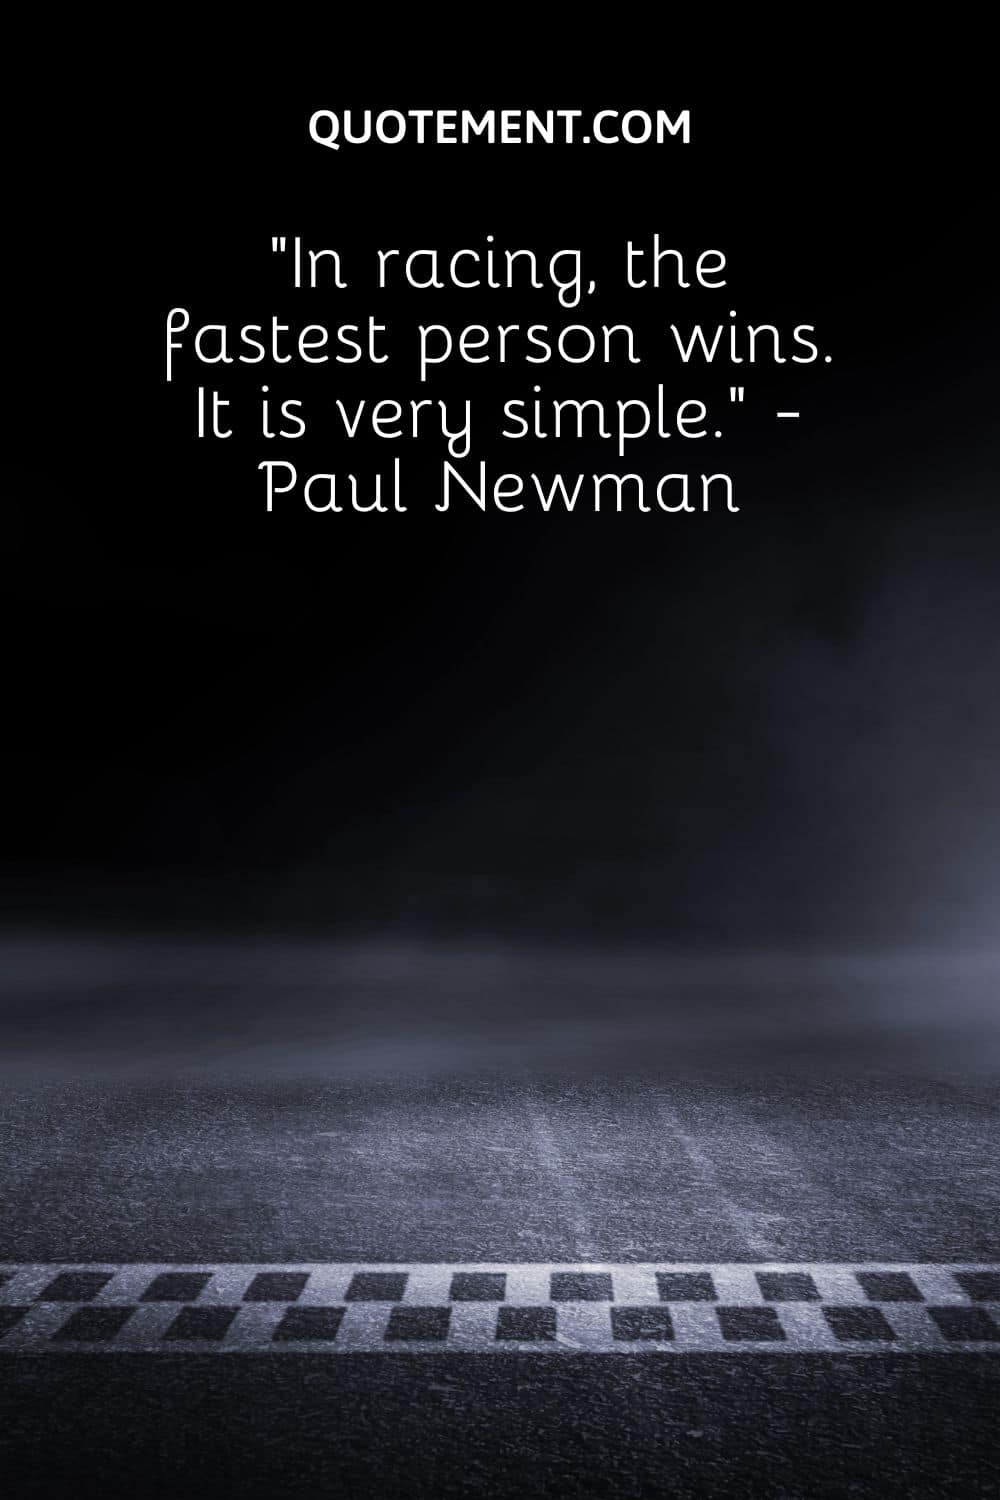 In racing, the fastest person wins. It is very simple